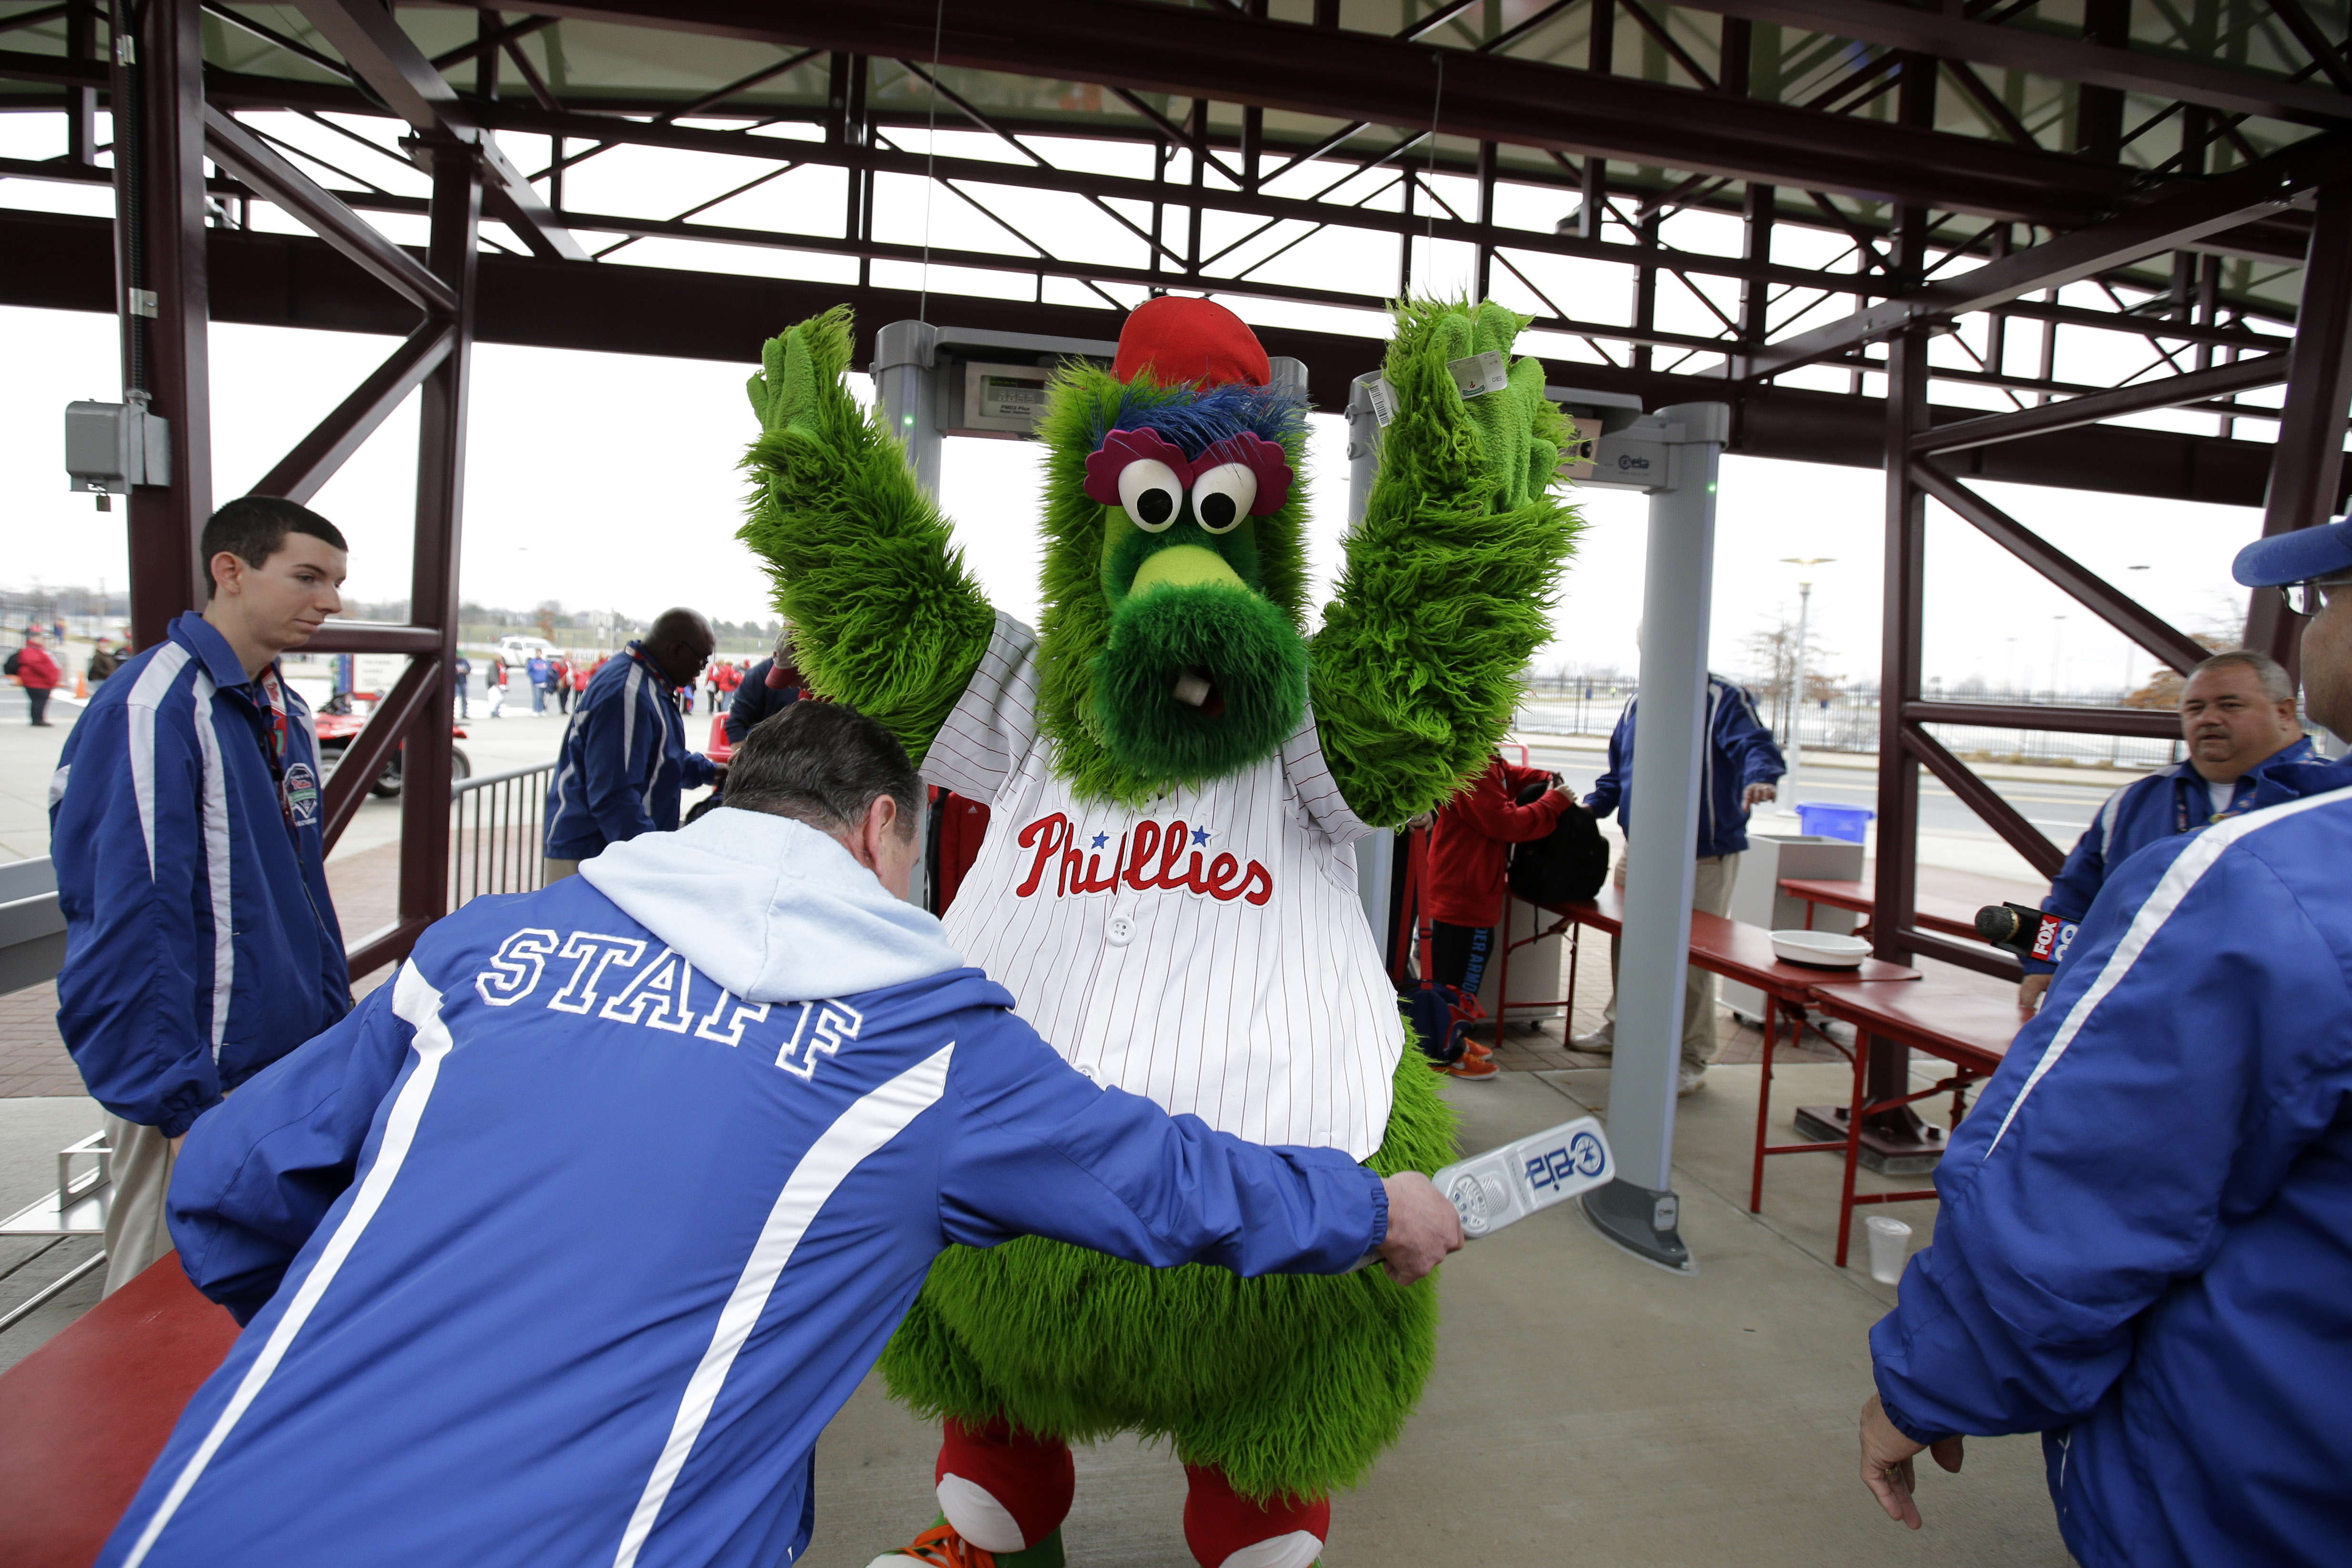 The Philadelphia Phillies' mascot, the Phillie Phanatic, is screened by security personnel for the media before an exhibition baseball game against the Pittsburgh Pirates, Friday, April 3, 2015, in Philadelphia. Citizens Bank Park has installed walk-through metal detectors to comply with Major League Baseball's new rule that all spectators be scanned before entering its stadiums. (AP Photo/Matt Slocum)